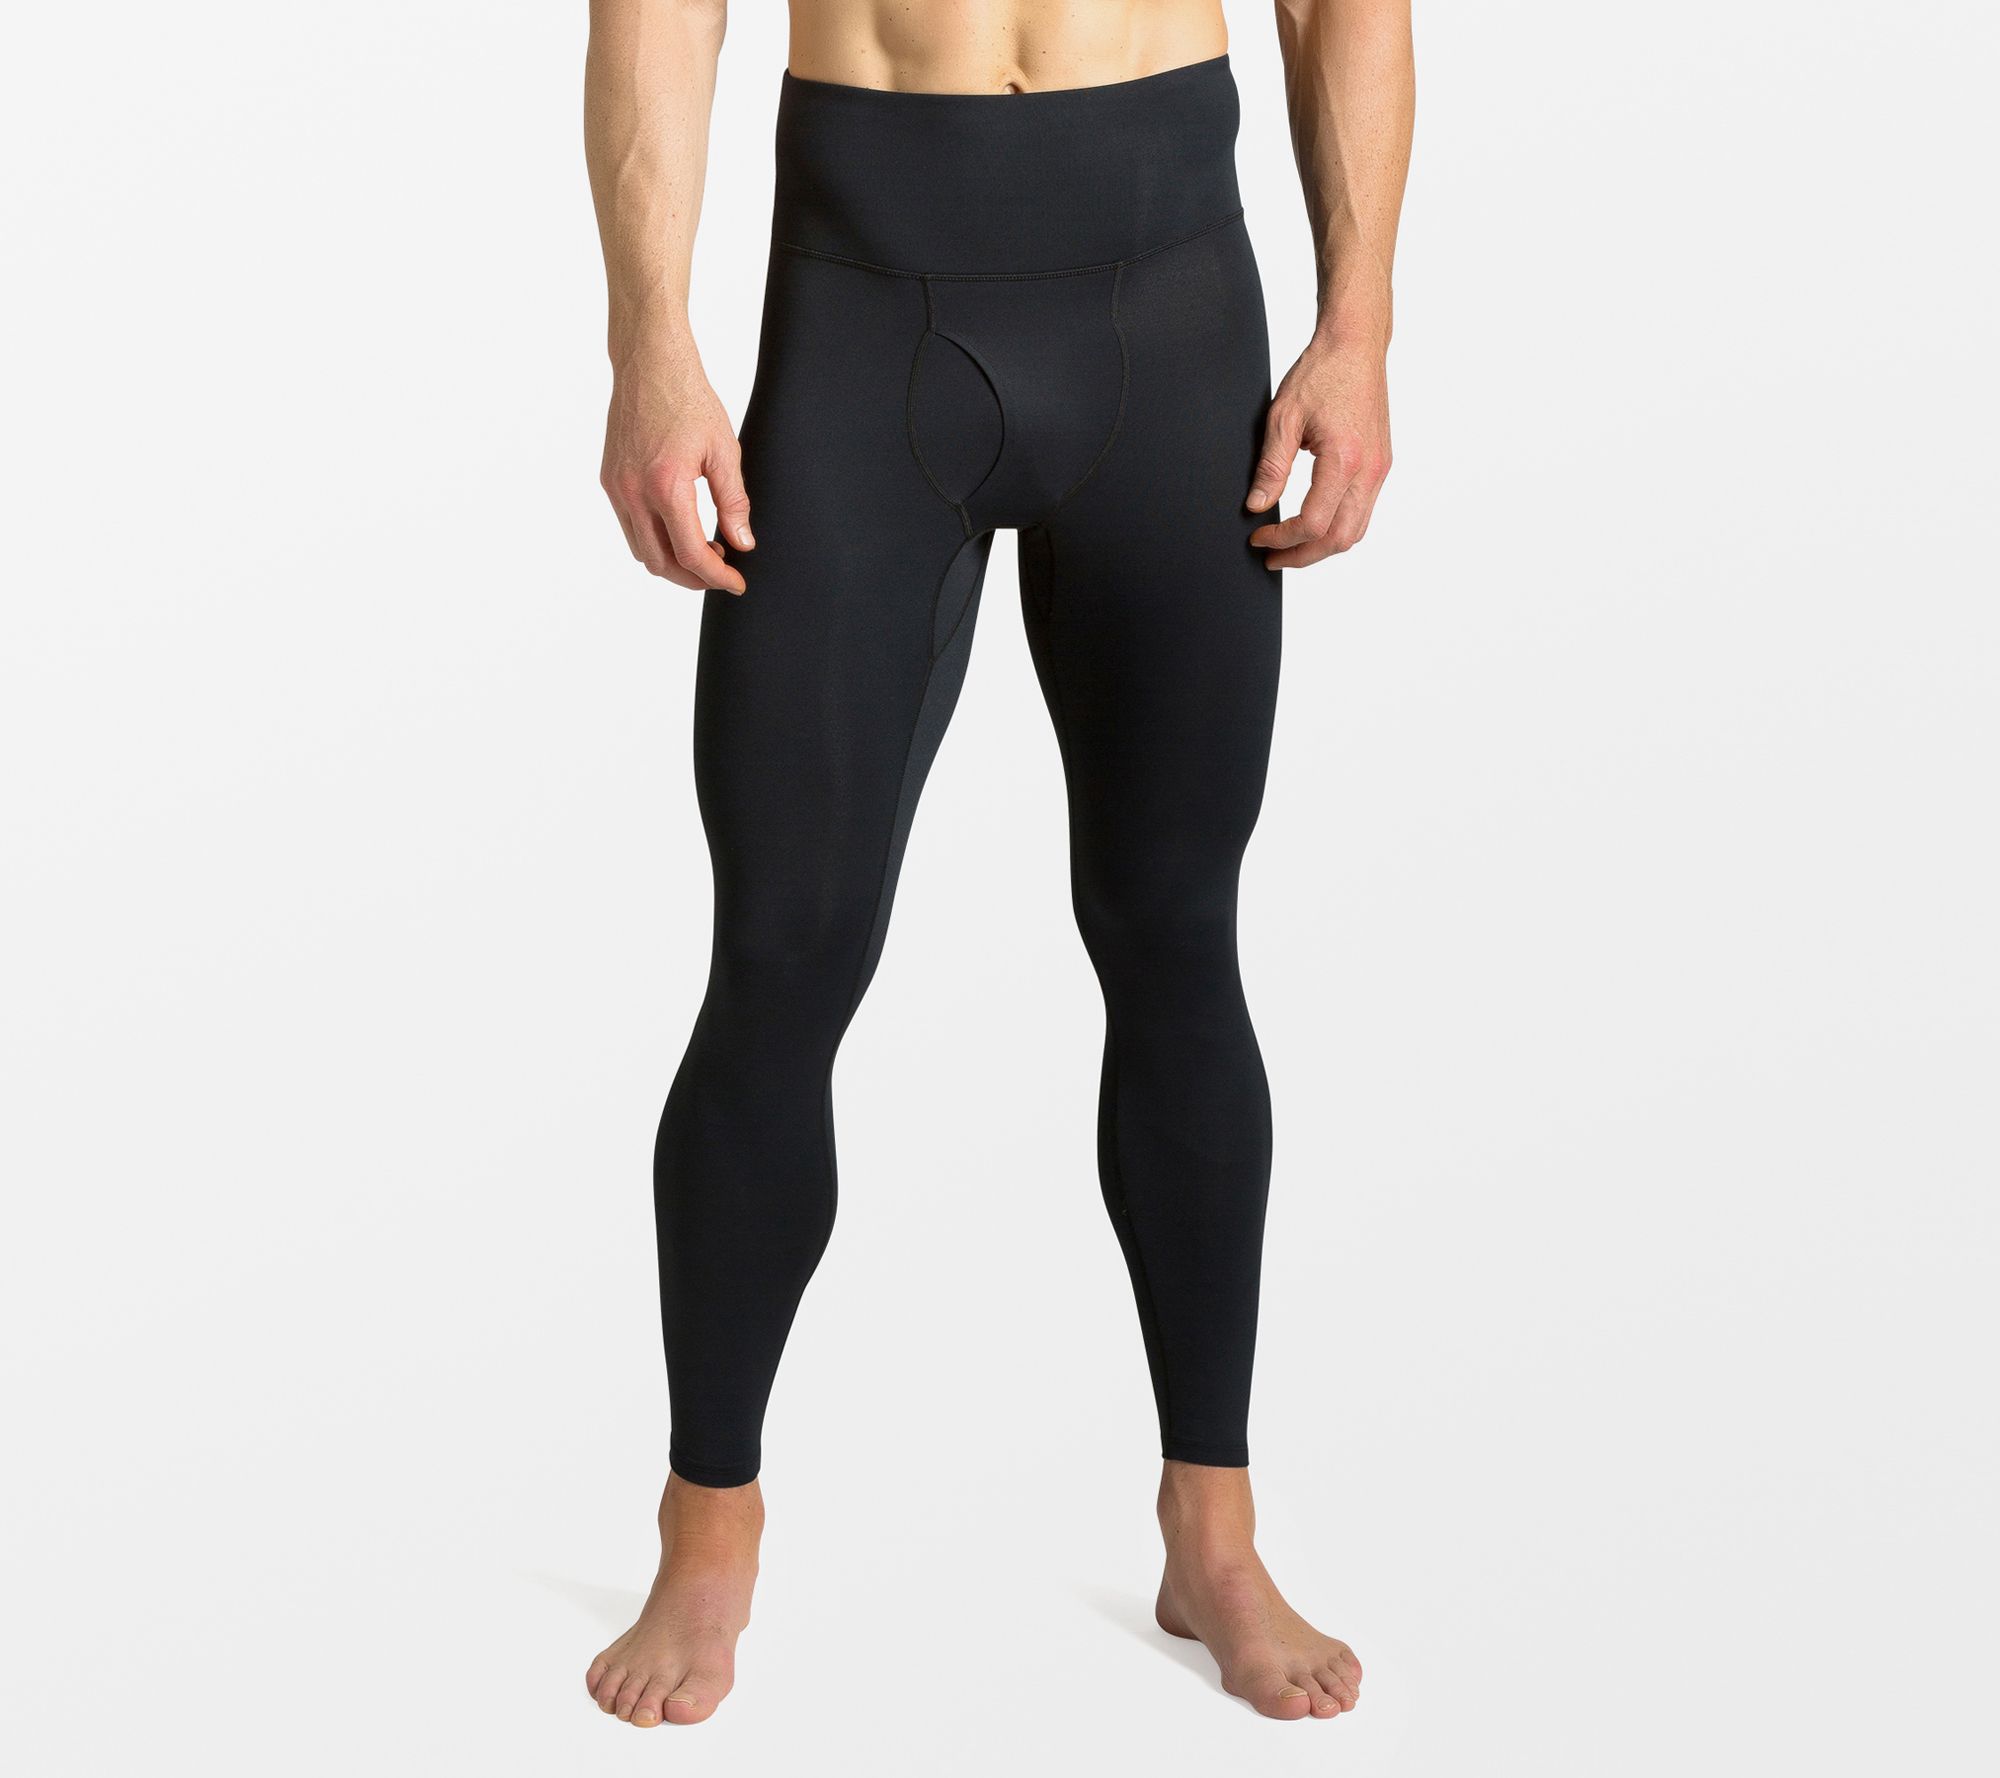 Tommie Copper Men's Ultra-Fit Lower Back Support Tights - QVC.com